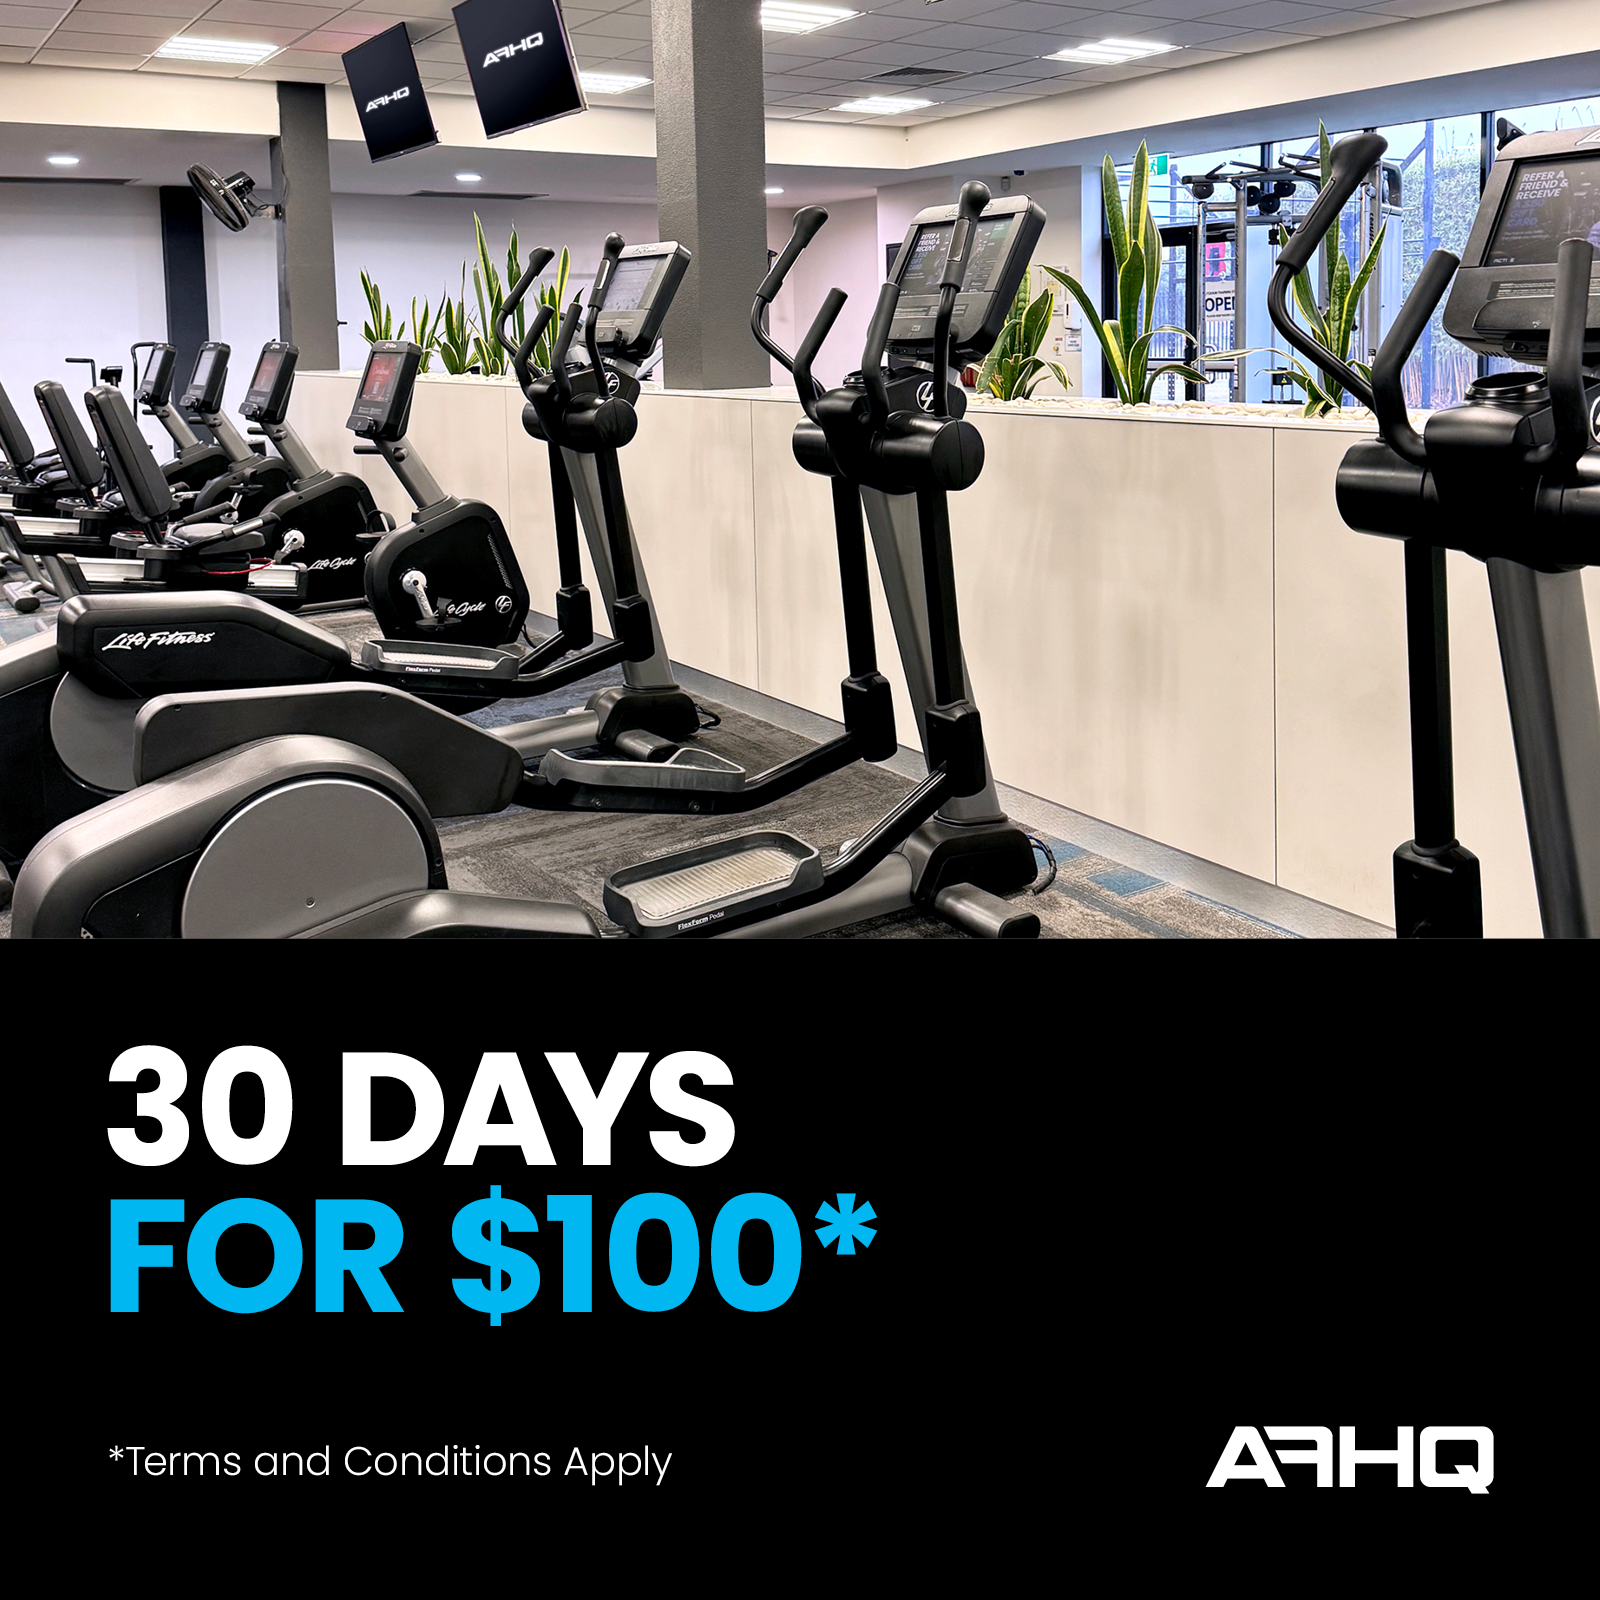 30 Days for $100